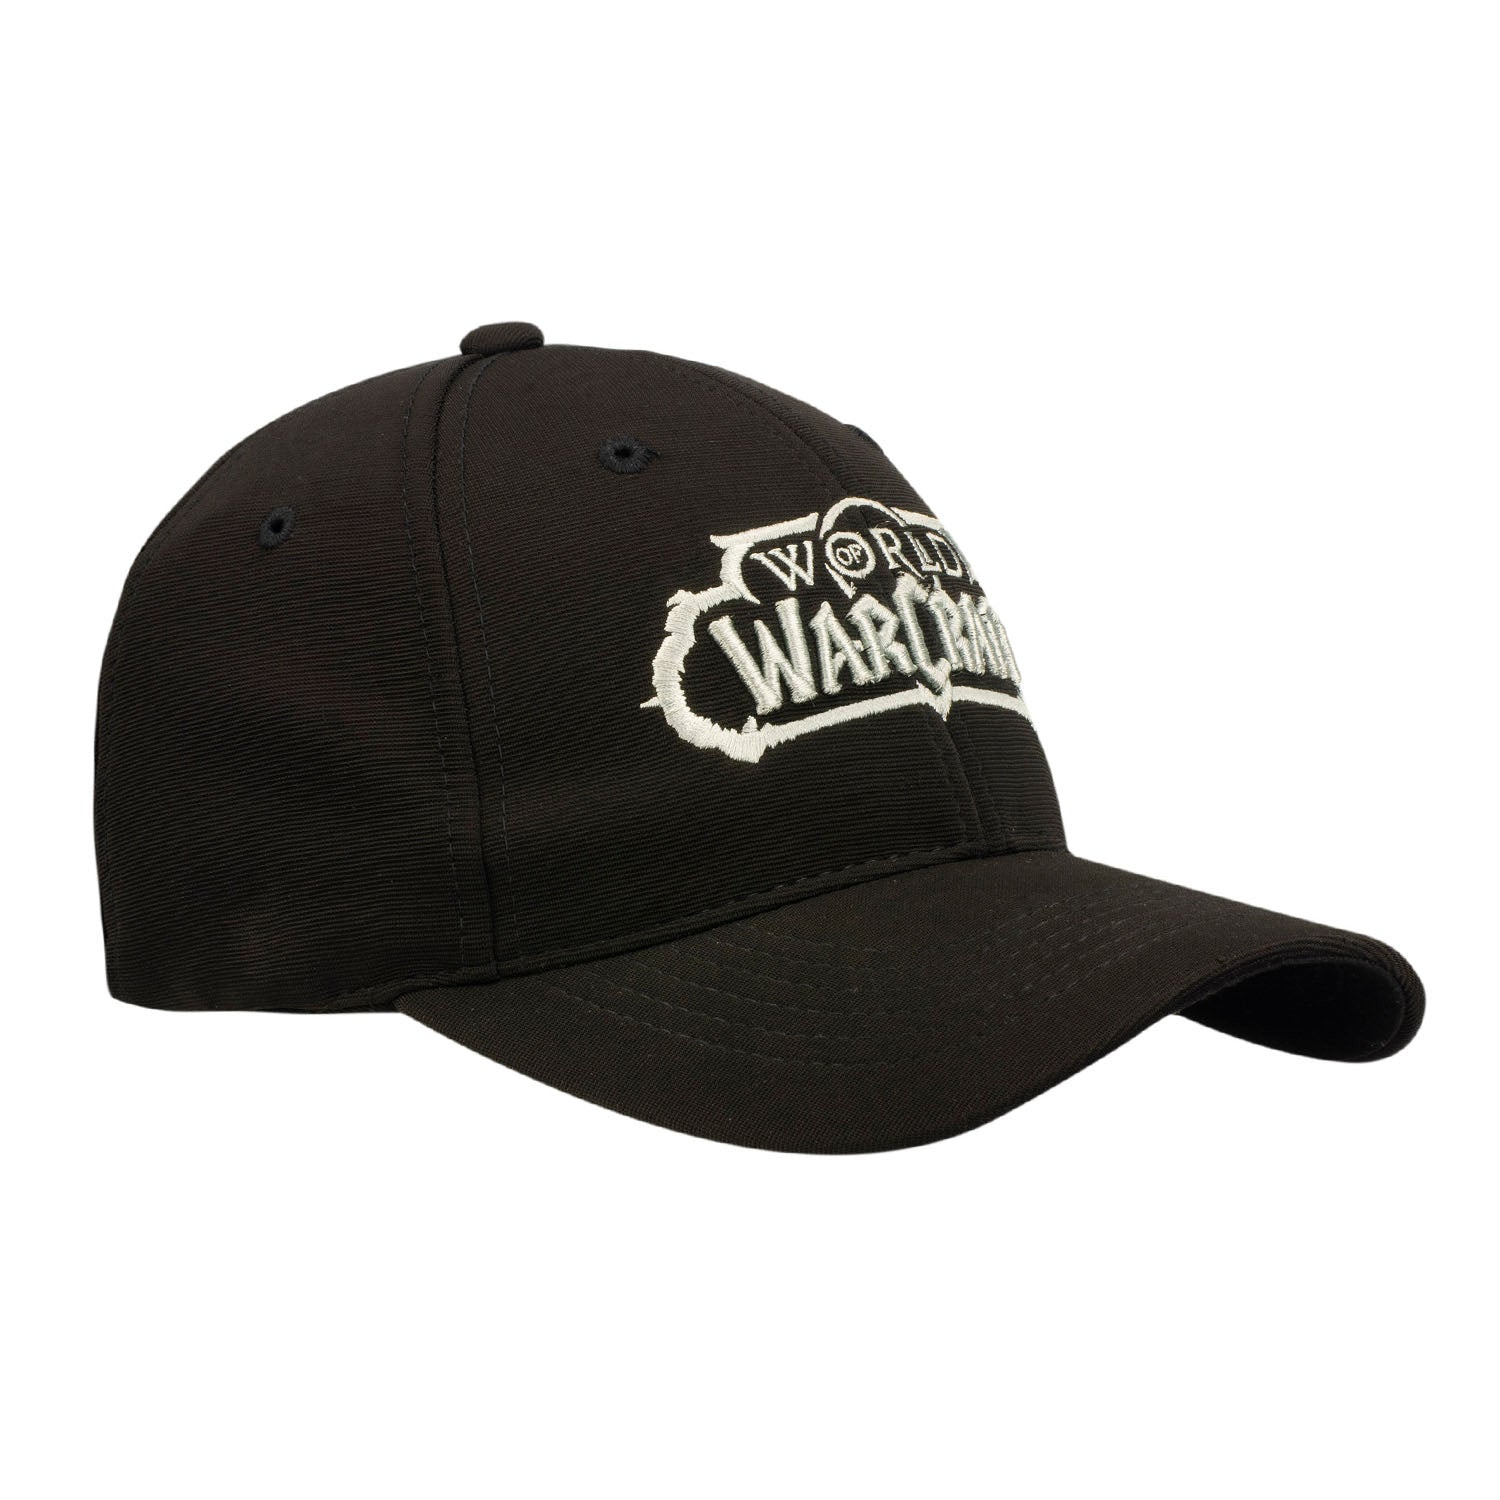 World of Warcraft Black Performance Hat - Right View